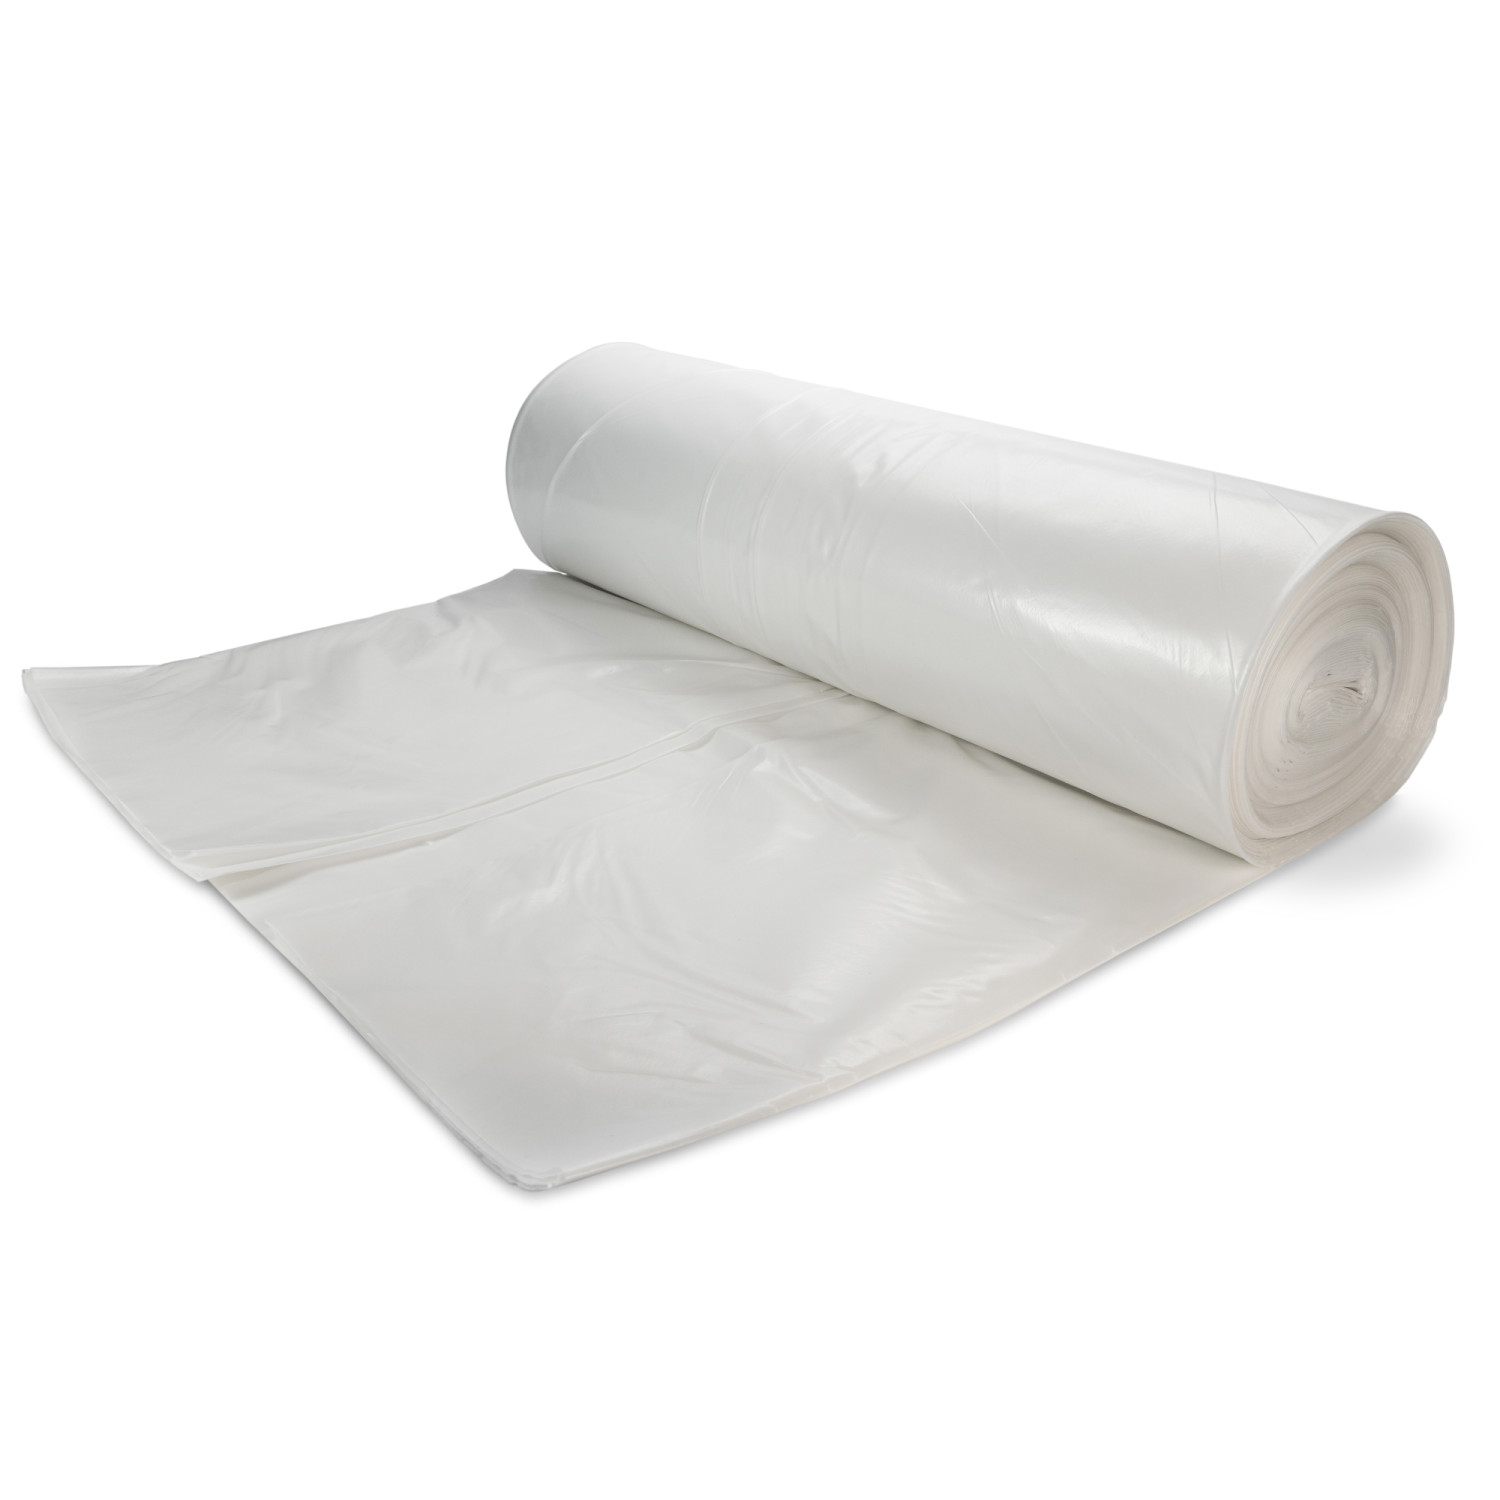 Idl Packaging Clear 6 Mil Greenhouse Plastic Sheeting, 20' x 100' (2000 Sq. ft.) LDPE Film Roll - Heavy-Duty Thick Polyethylene for Farm, Garden